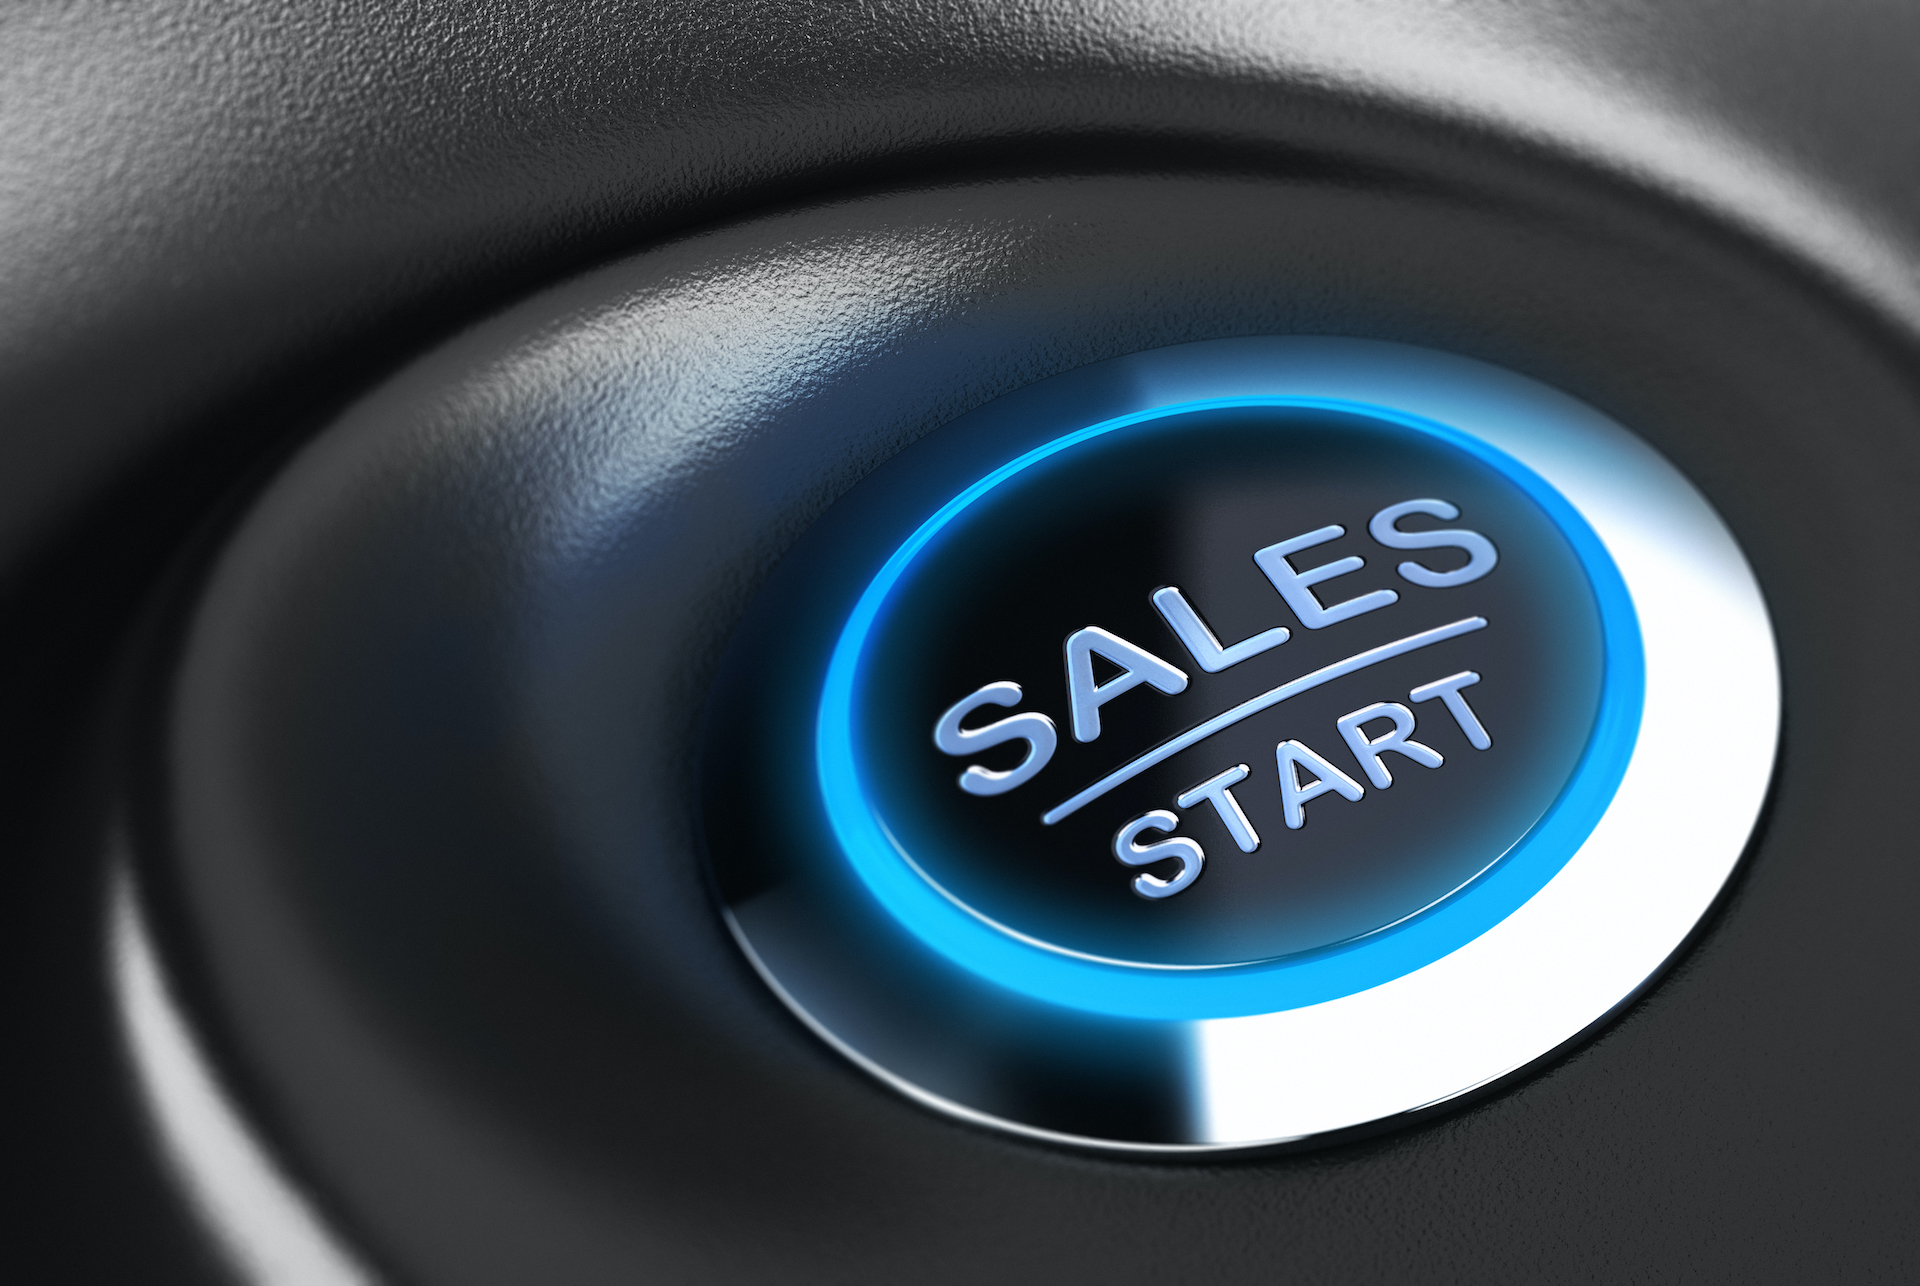 Sales button with blue light